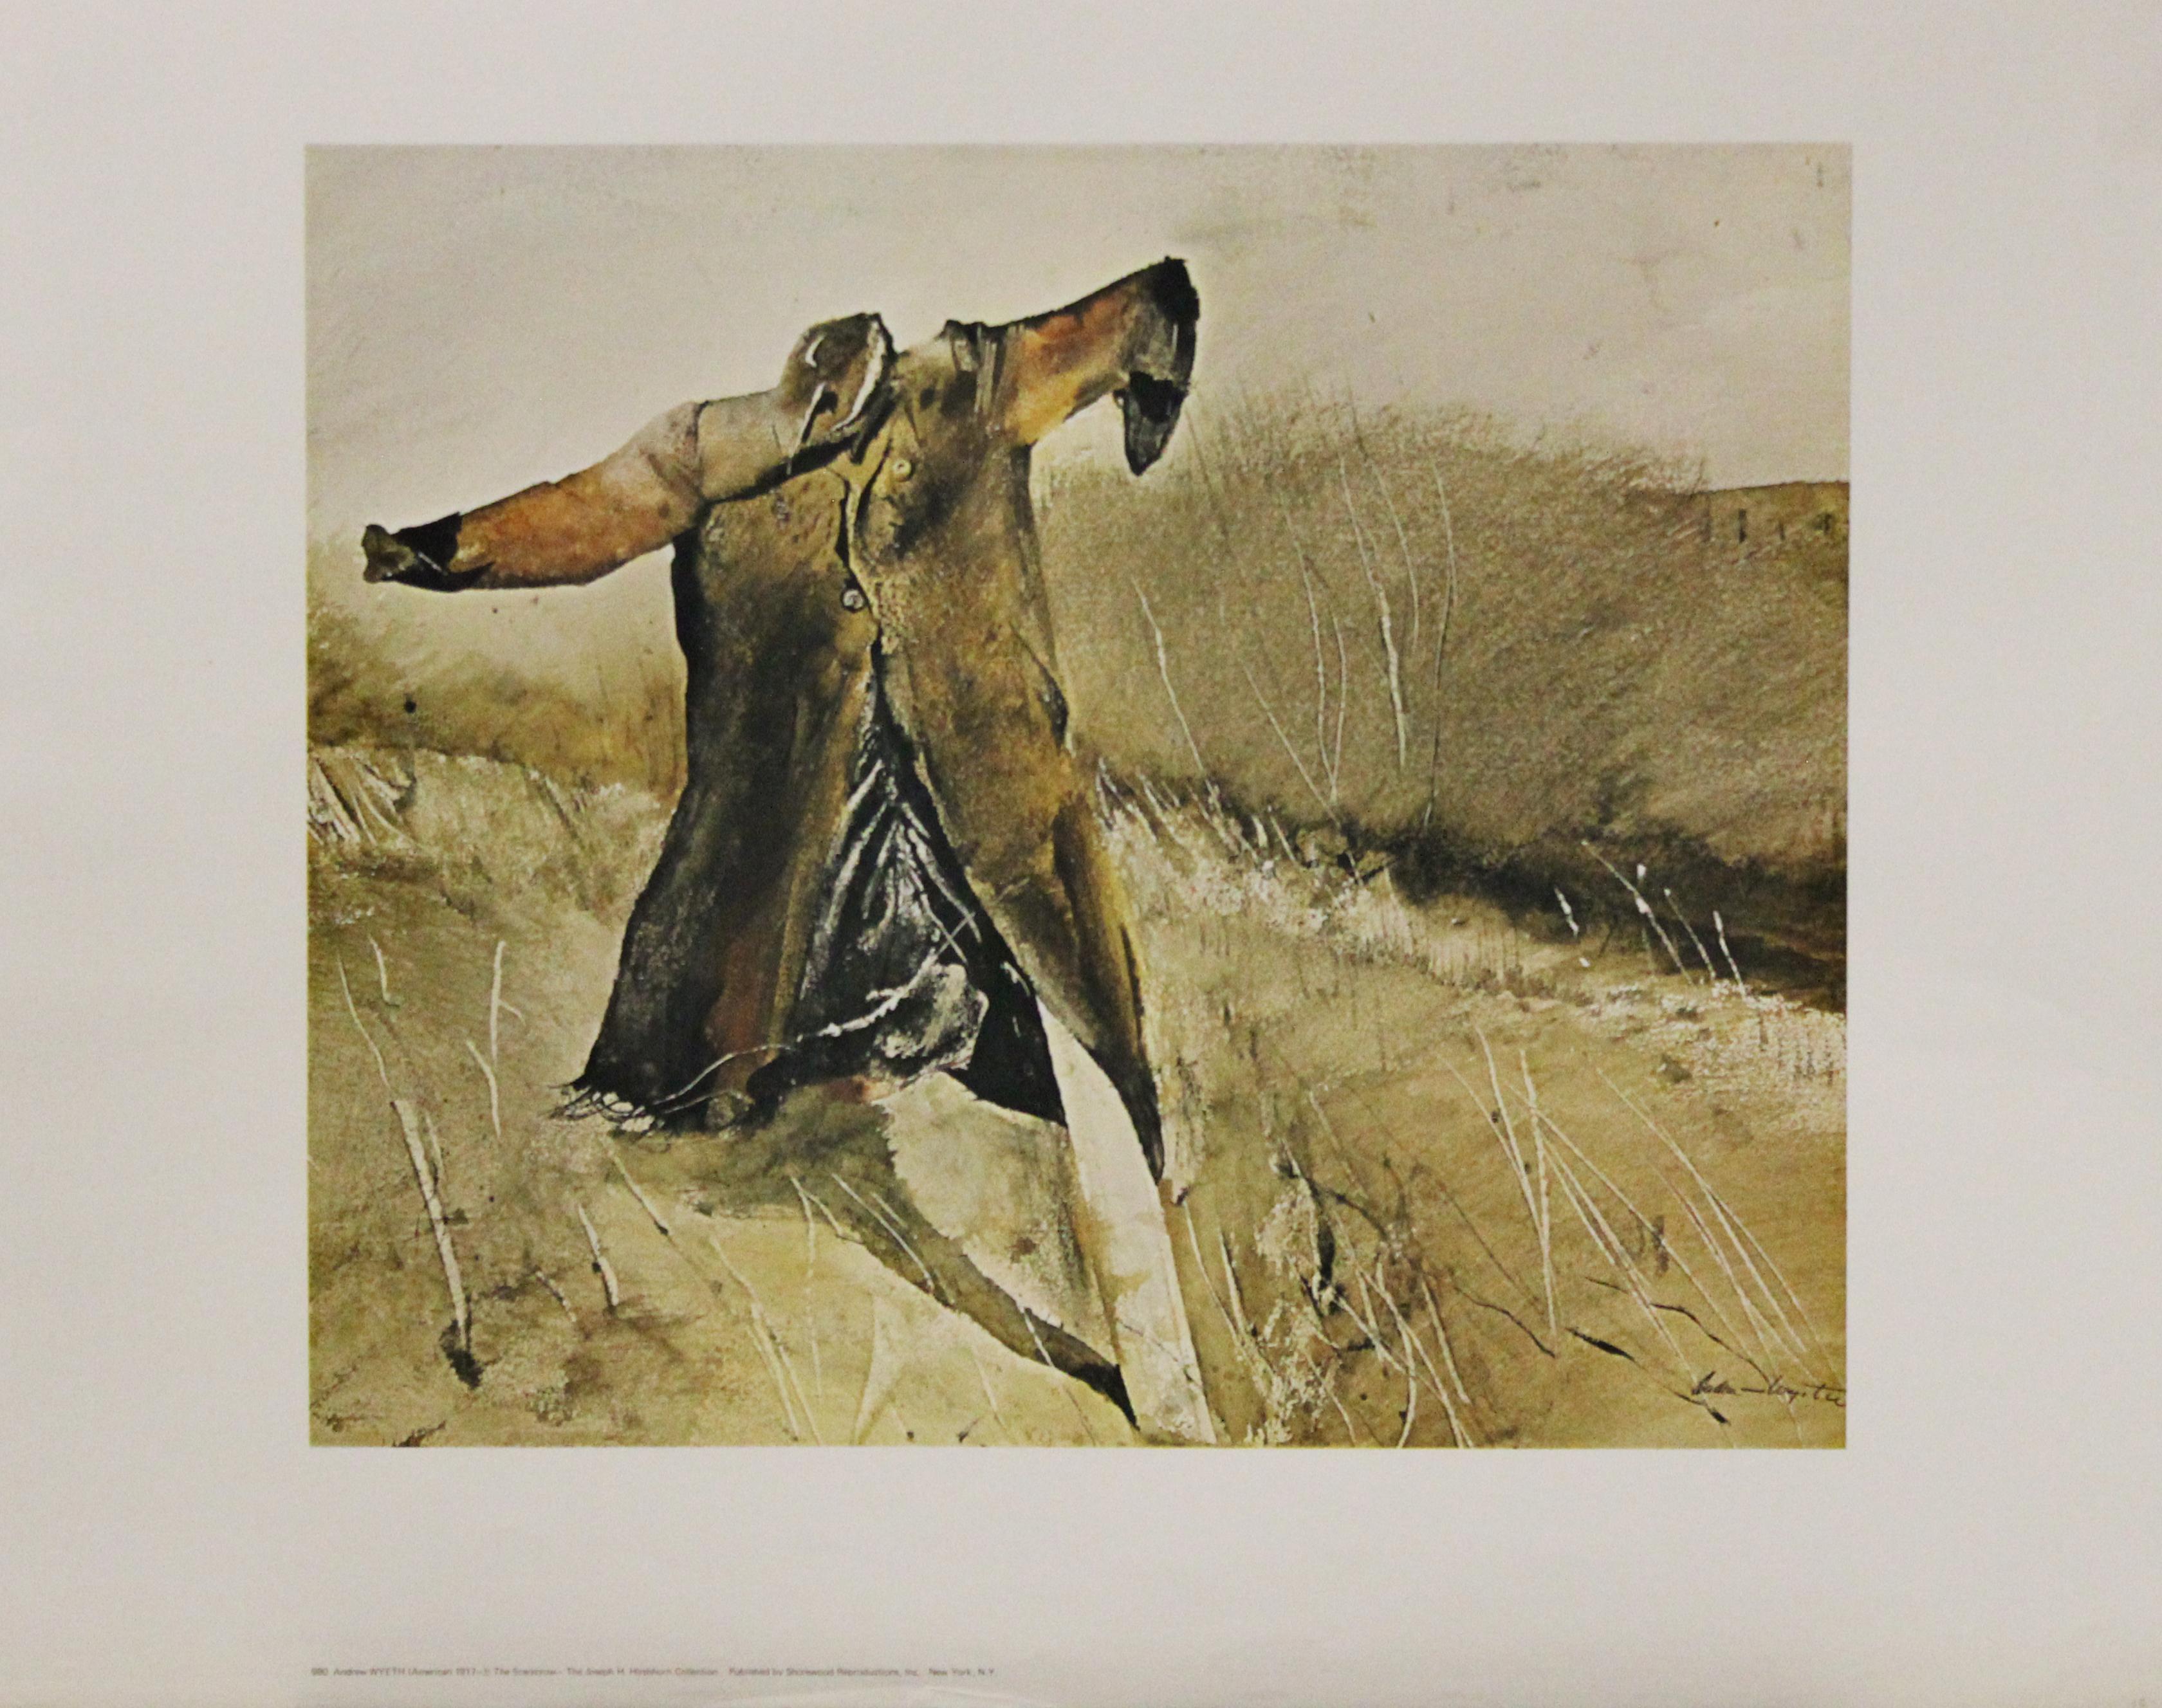 (after) Andrew Wyeth Portrait Print - The Scarecrow-Poster. Published by Shorewood Reproductions, Inc. 